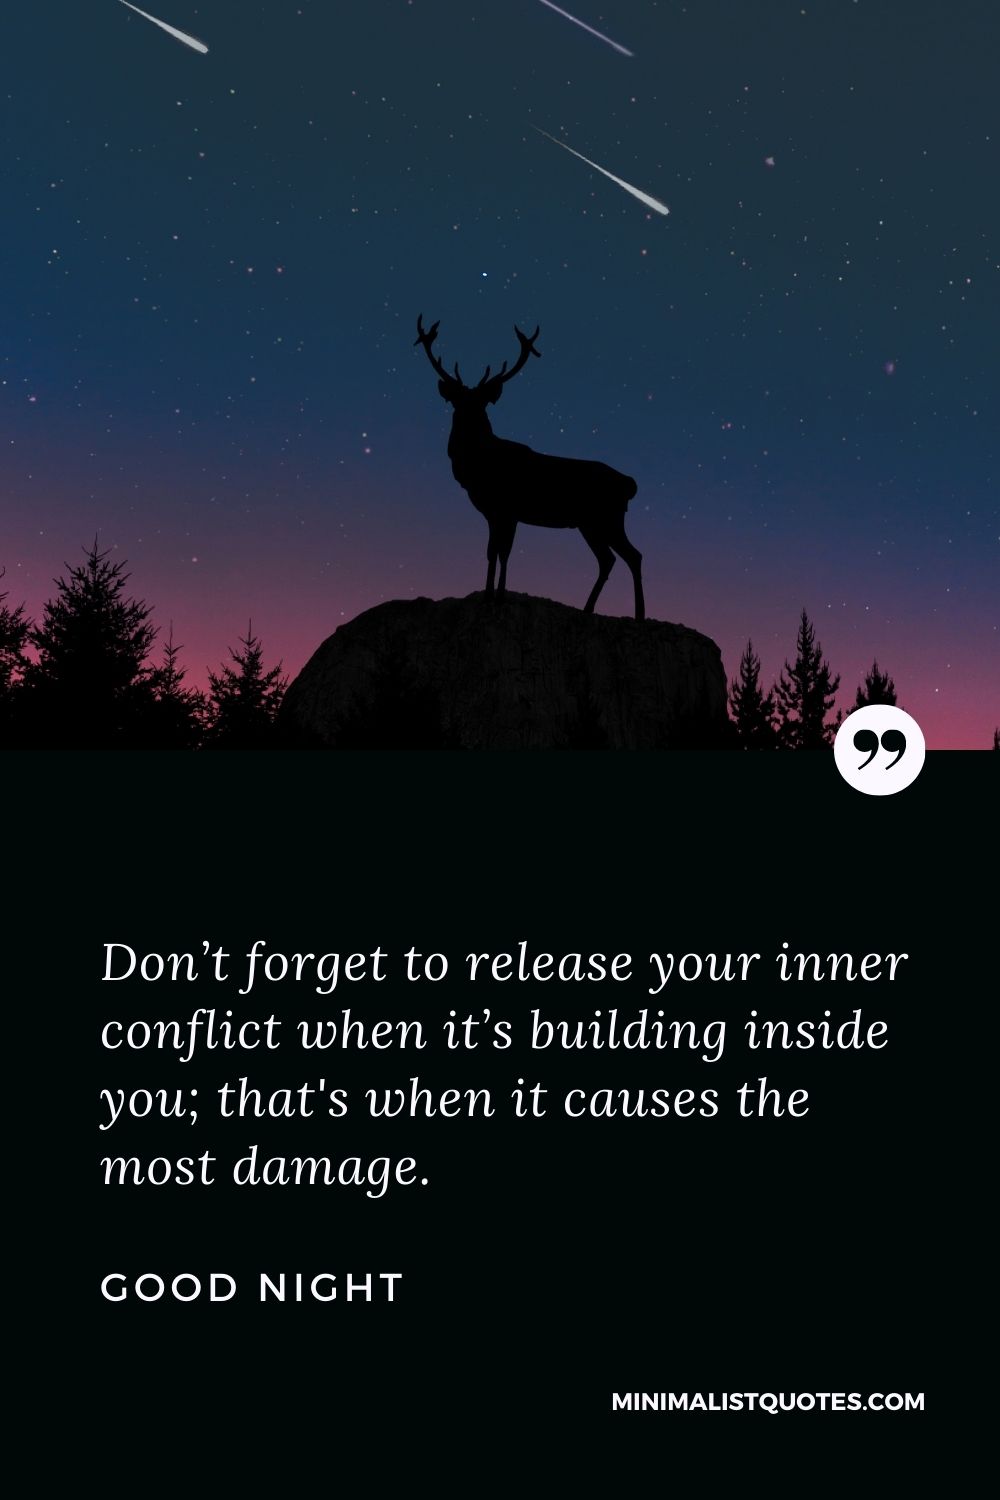 Good Night Wishes - Don’t forget to release your inner conflict when it’s building inside you; that's when it causes the most damage.